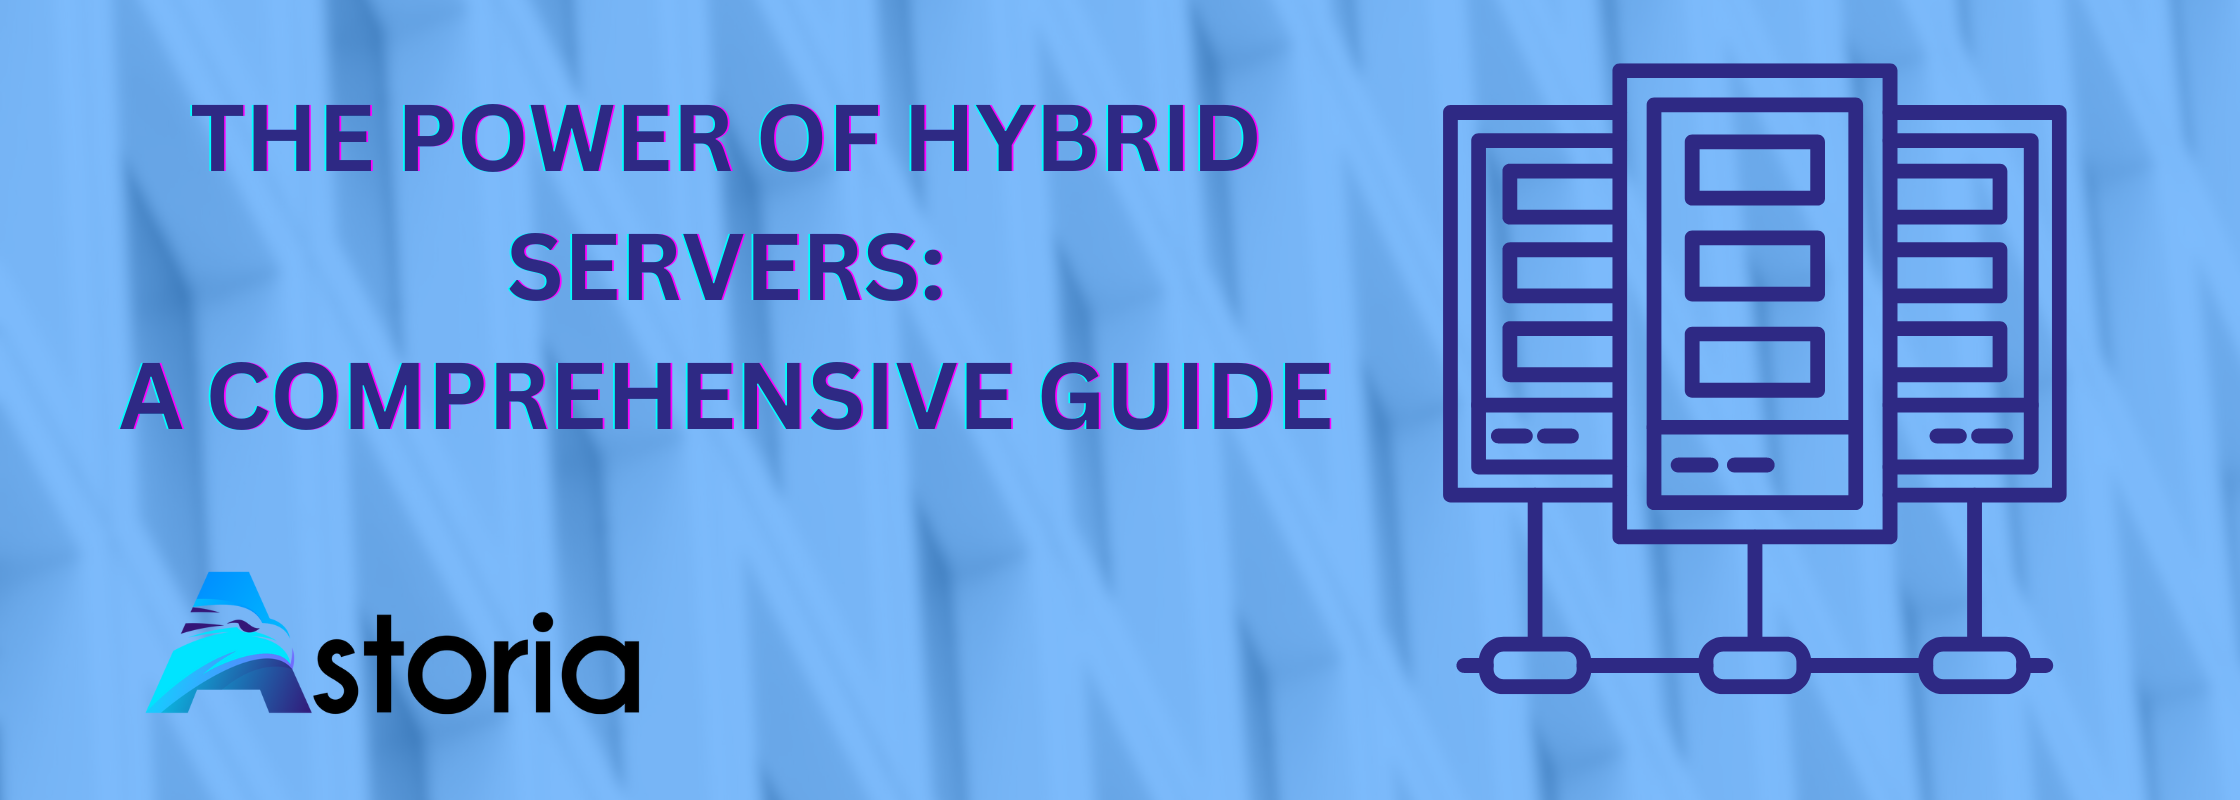 The Power of Hybrid Servers: A Comprehensive Guide